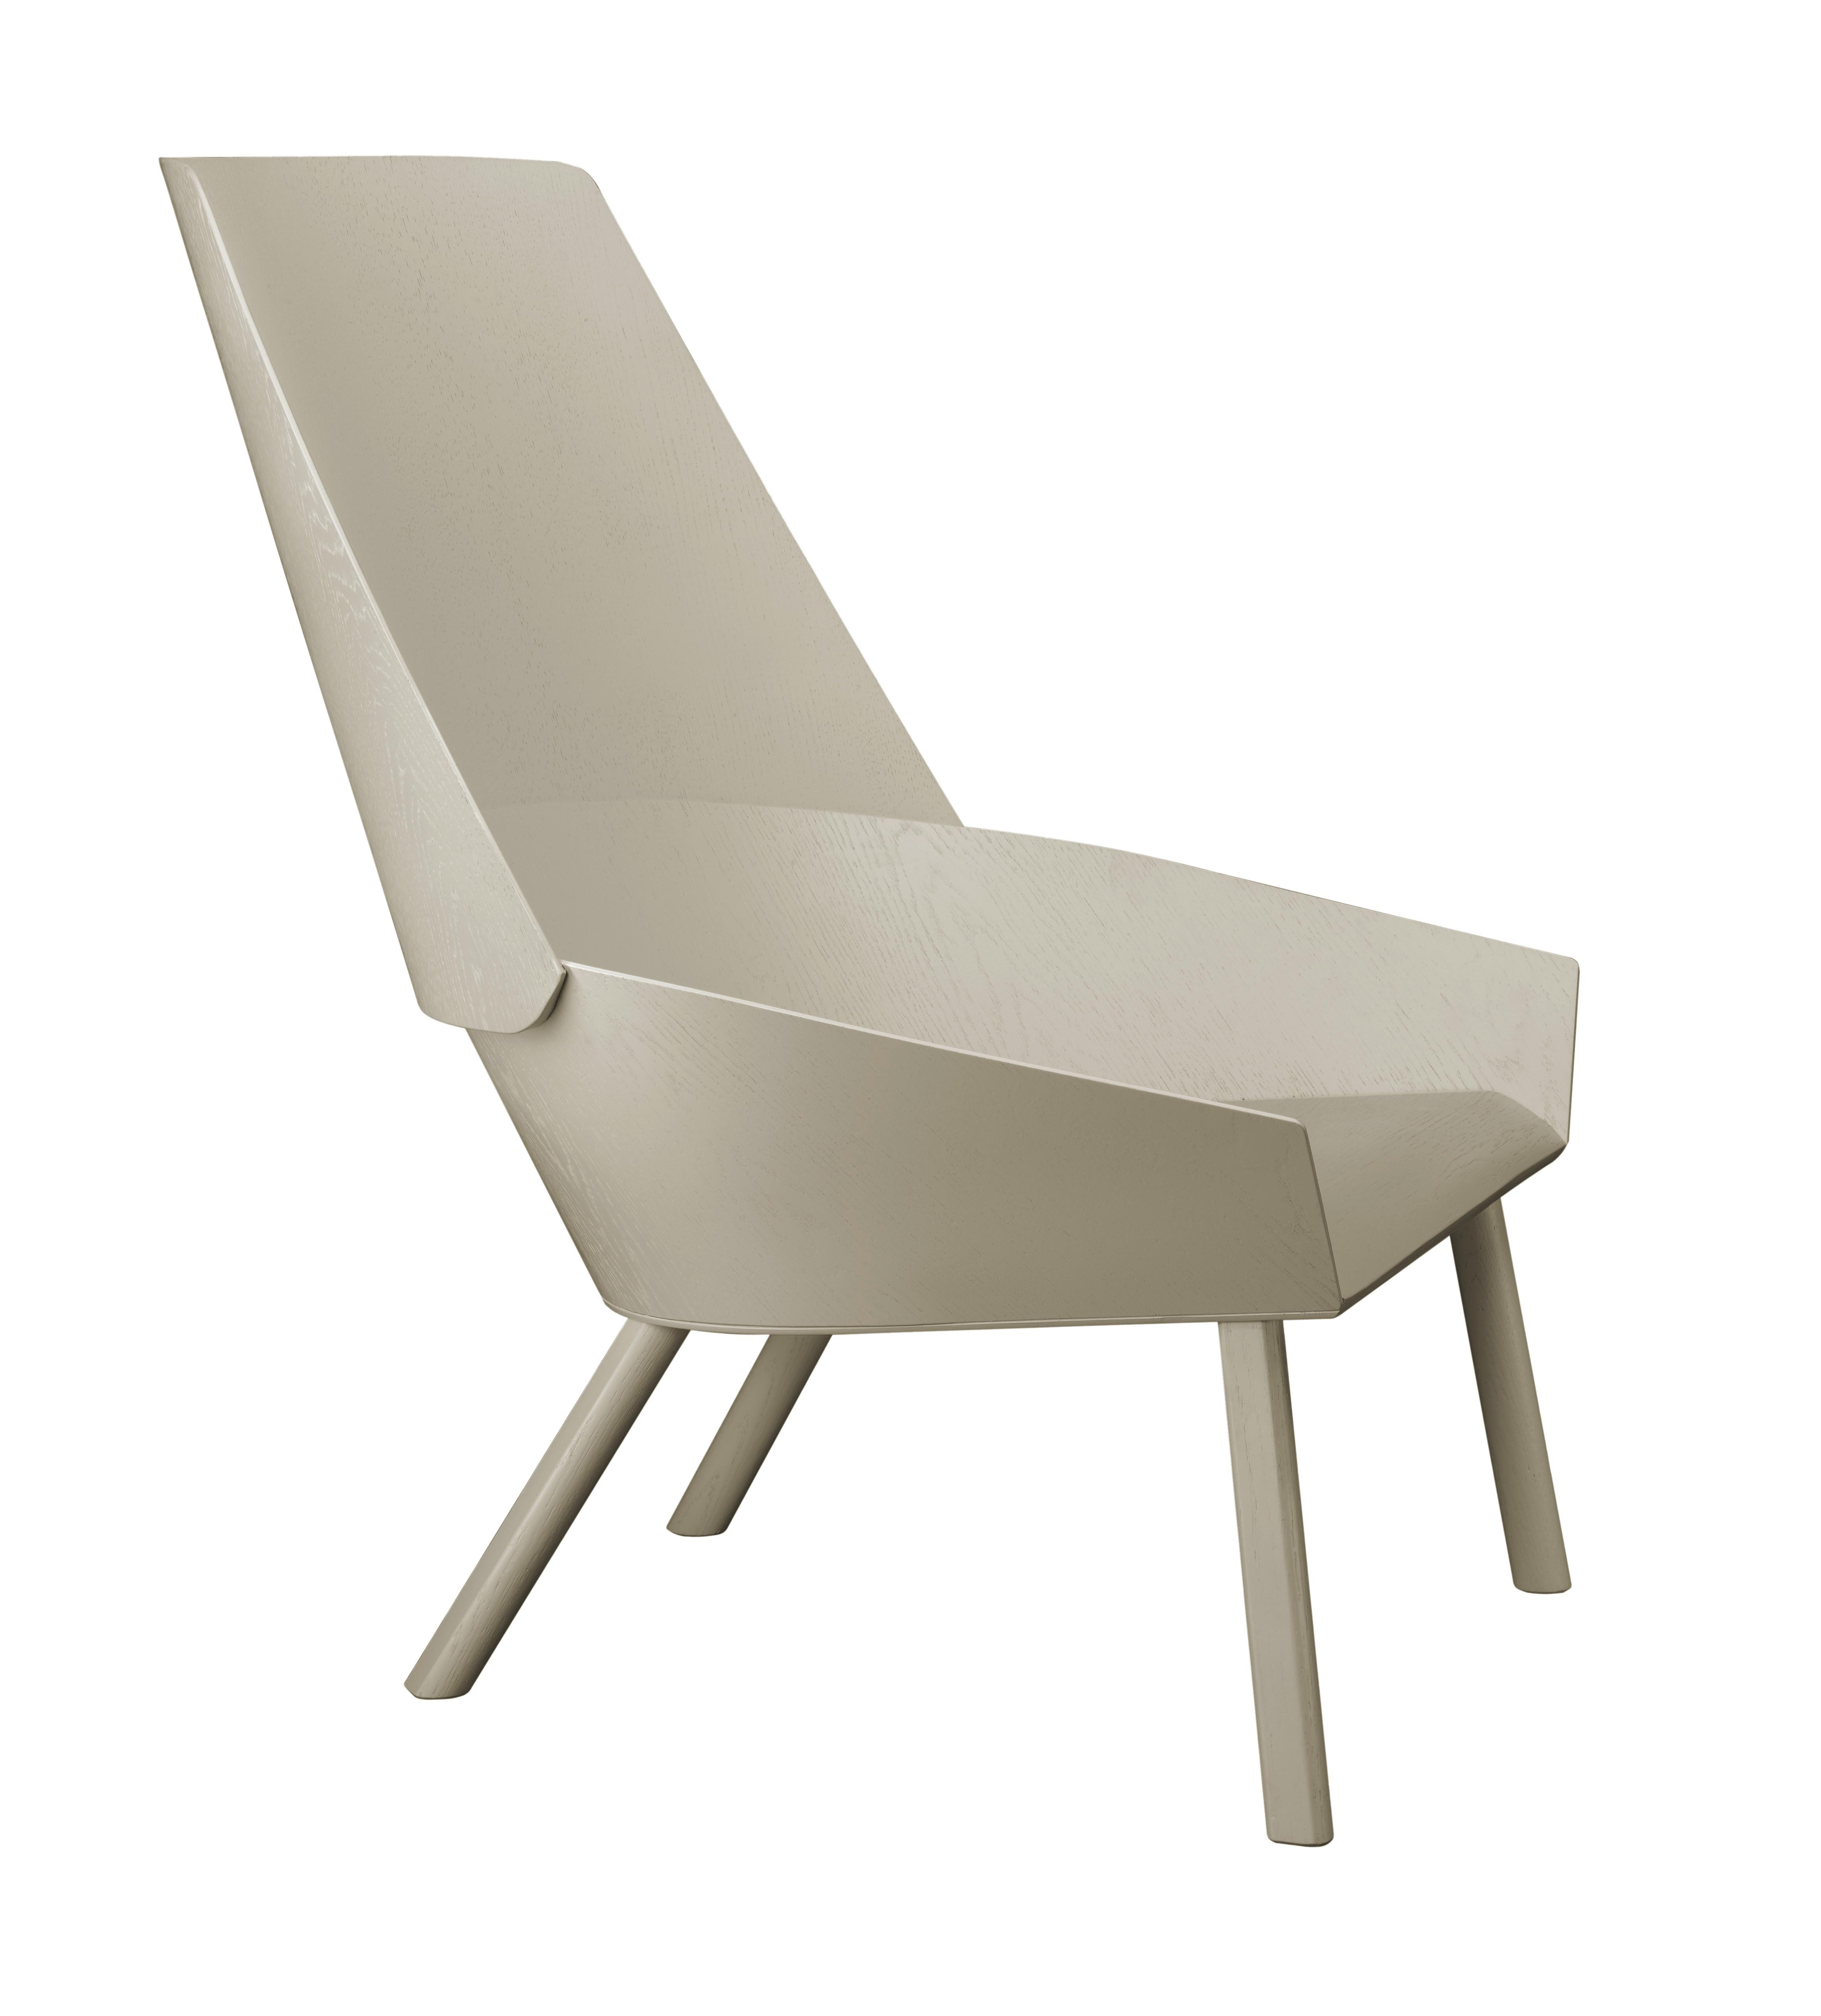 For Sale: Gray (Silk Gray Lacquer) Customizable e15 Eugene Lounge Chair with Oak Base by Stefan Diez